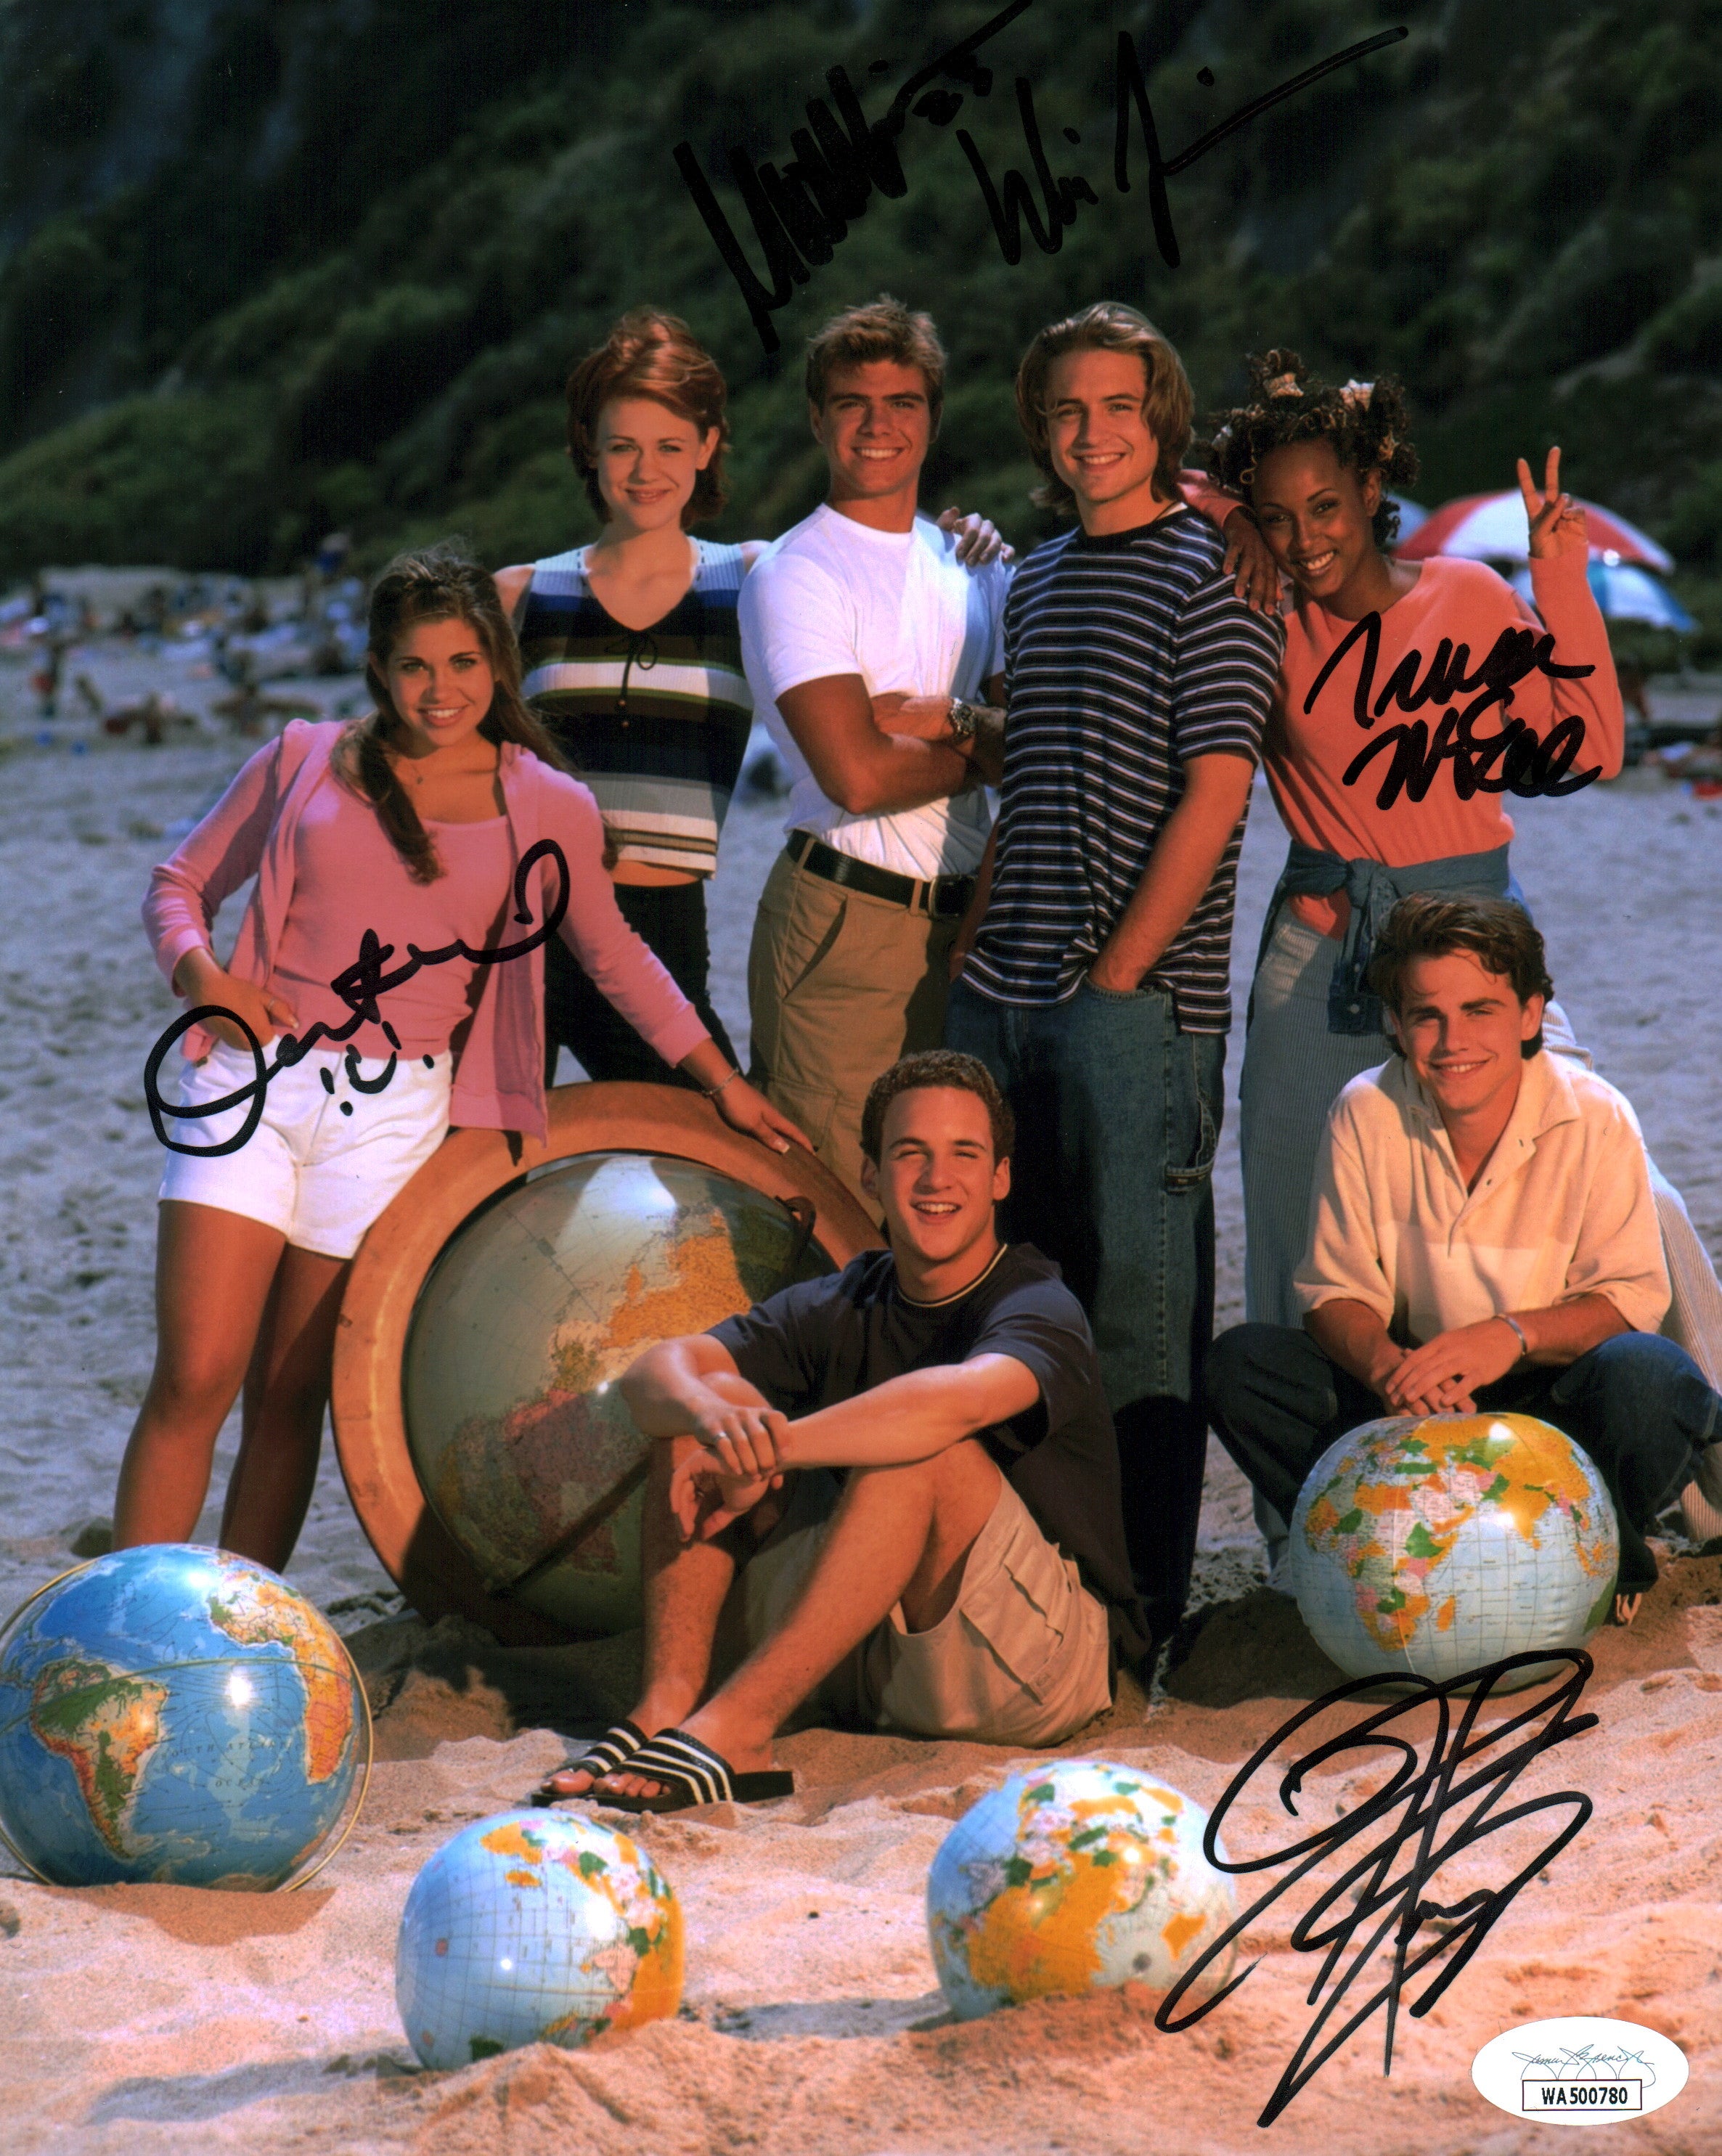 Boy Meets World 8x10 Signed Cast x5 Fishel, Friedle, Lawrence, McGee, Strong JSA Certified Autograph